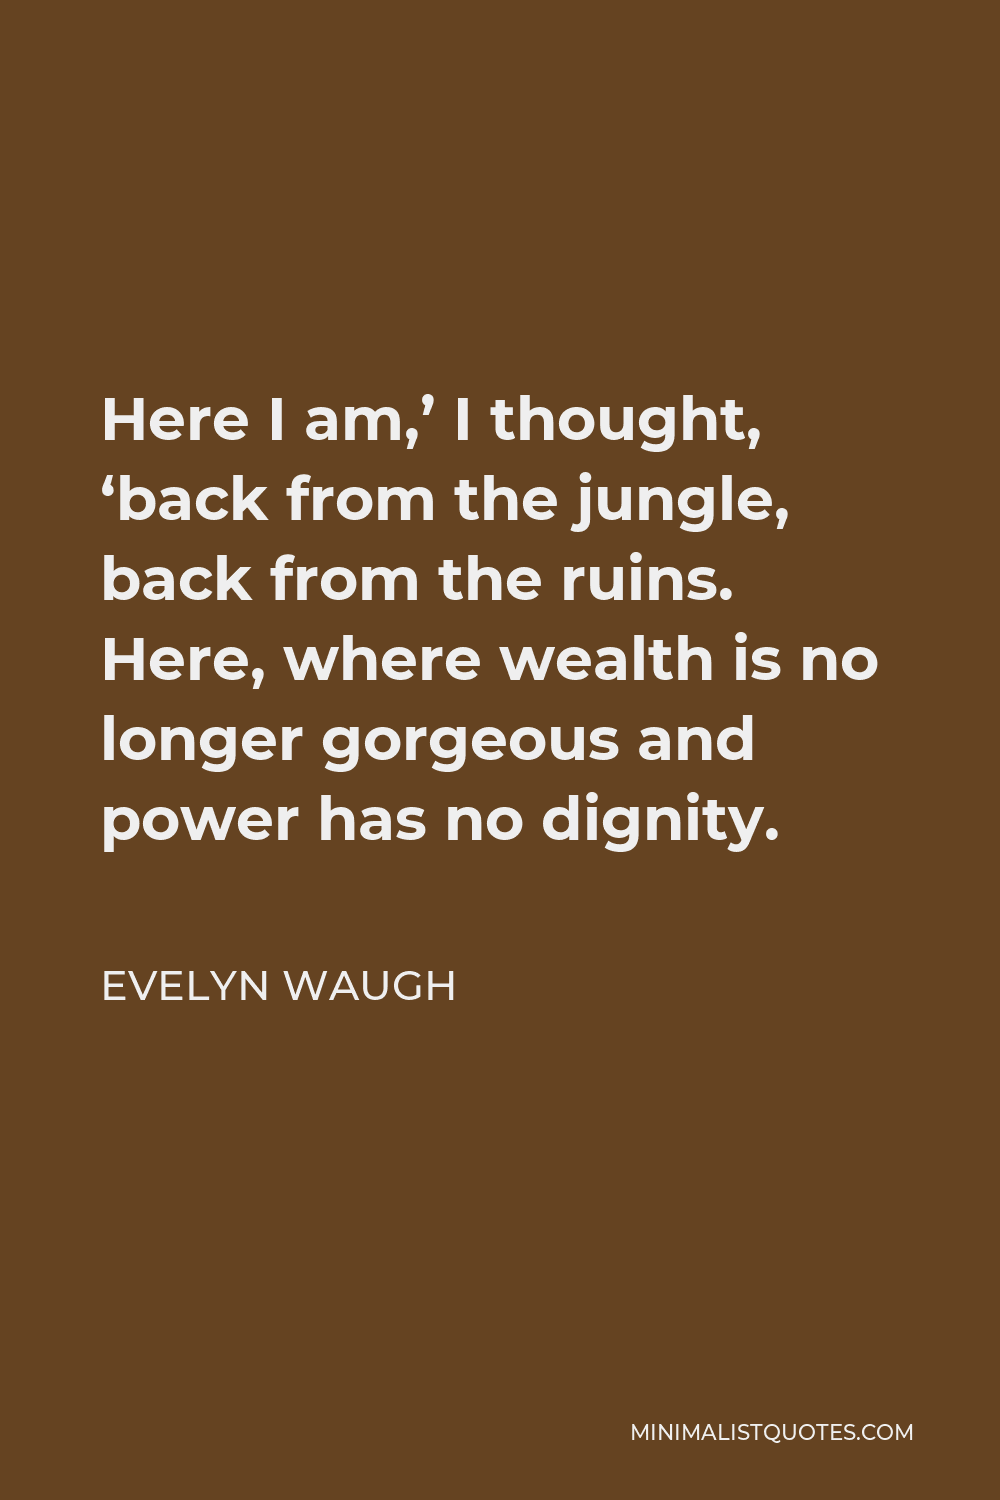 Evelyn Waugh Quote - Here I am,’ I thought, ‘back from the jungle, back from the ruins. Here, where wealth is no longer gorgeous and power has no dignity.